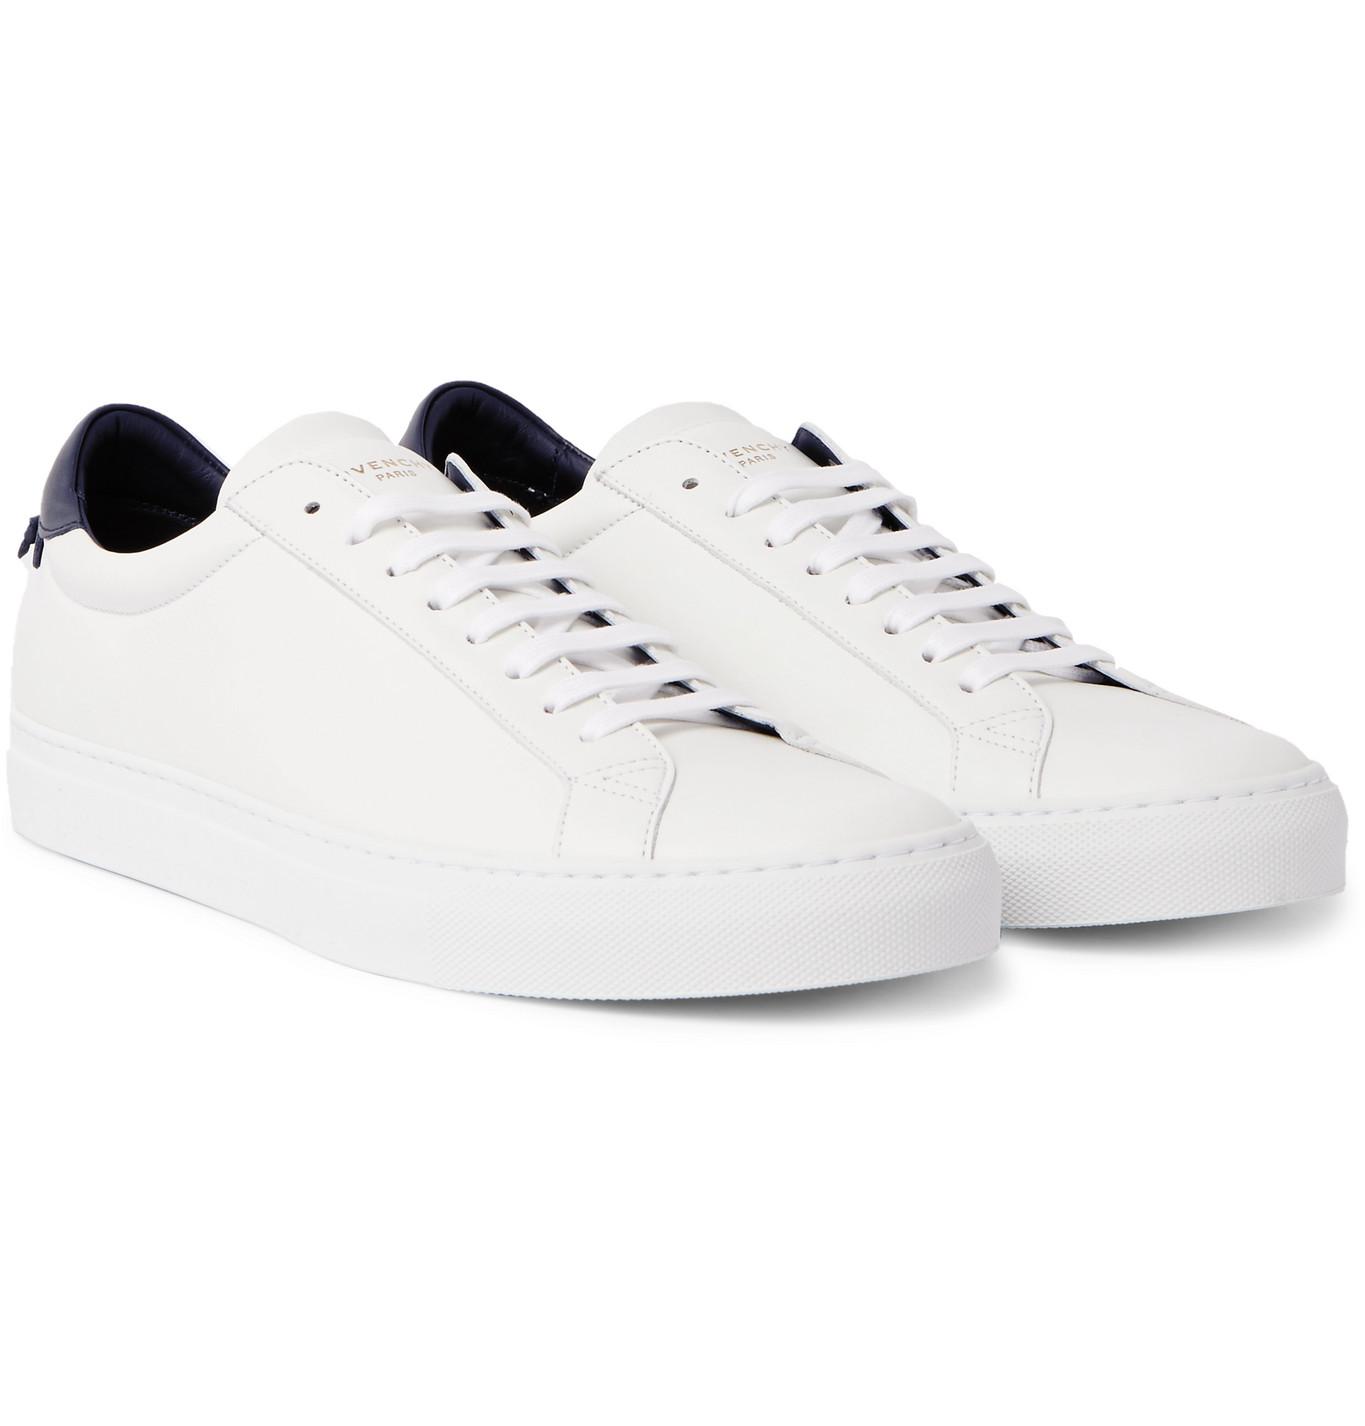 Givenchy Urban Street Leather Sneakers in White for Men - Lyst